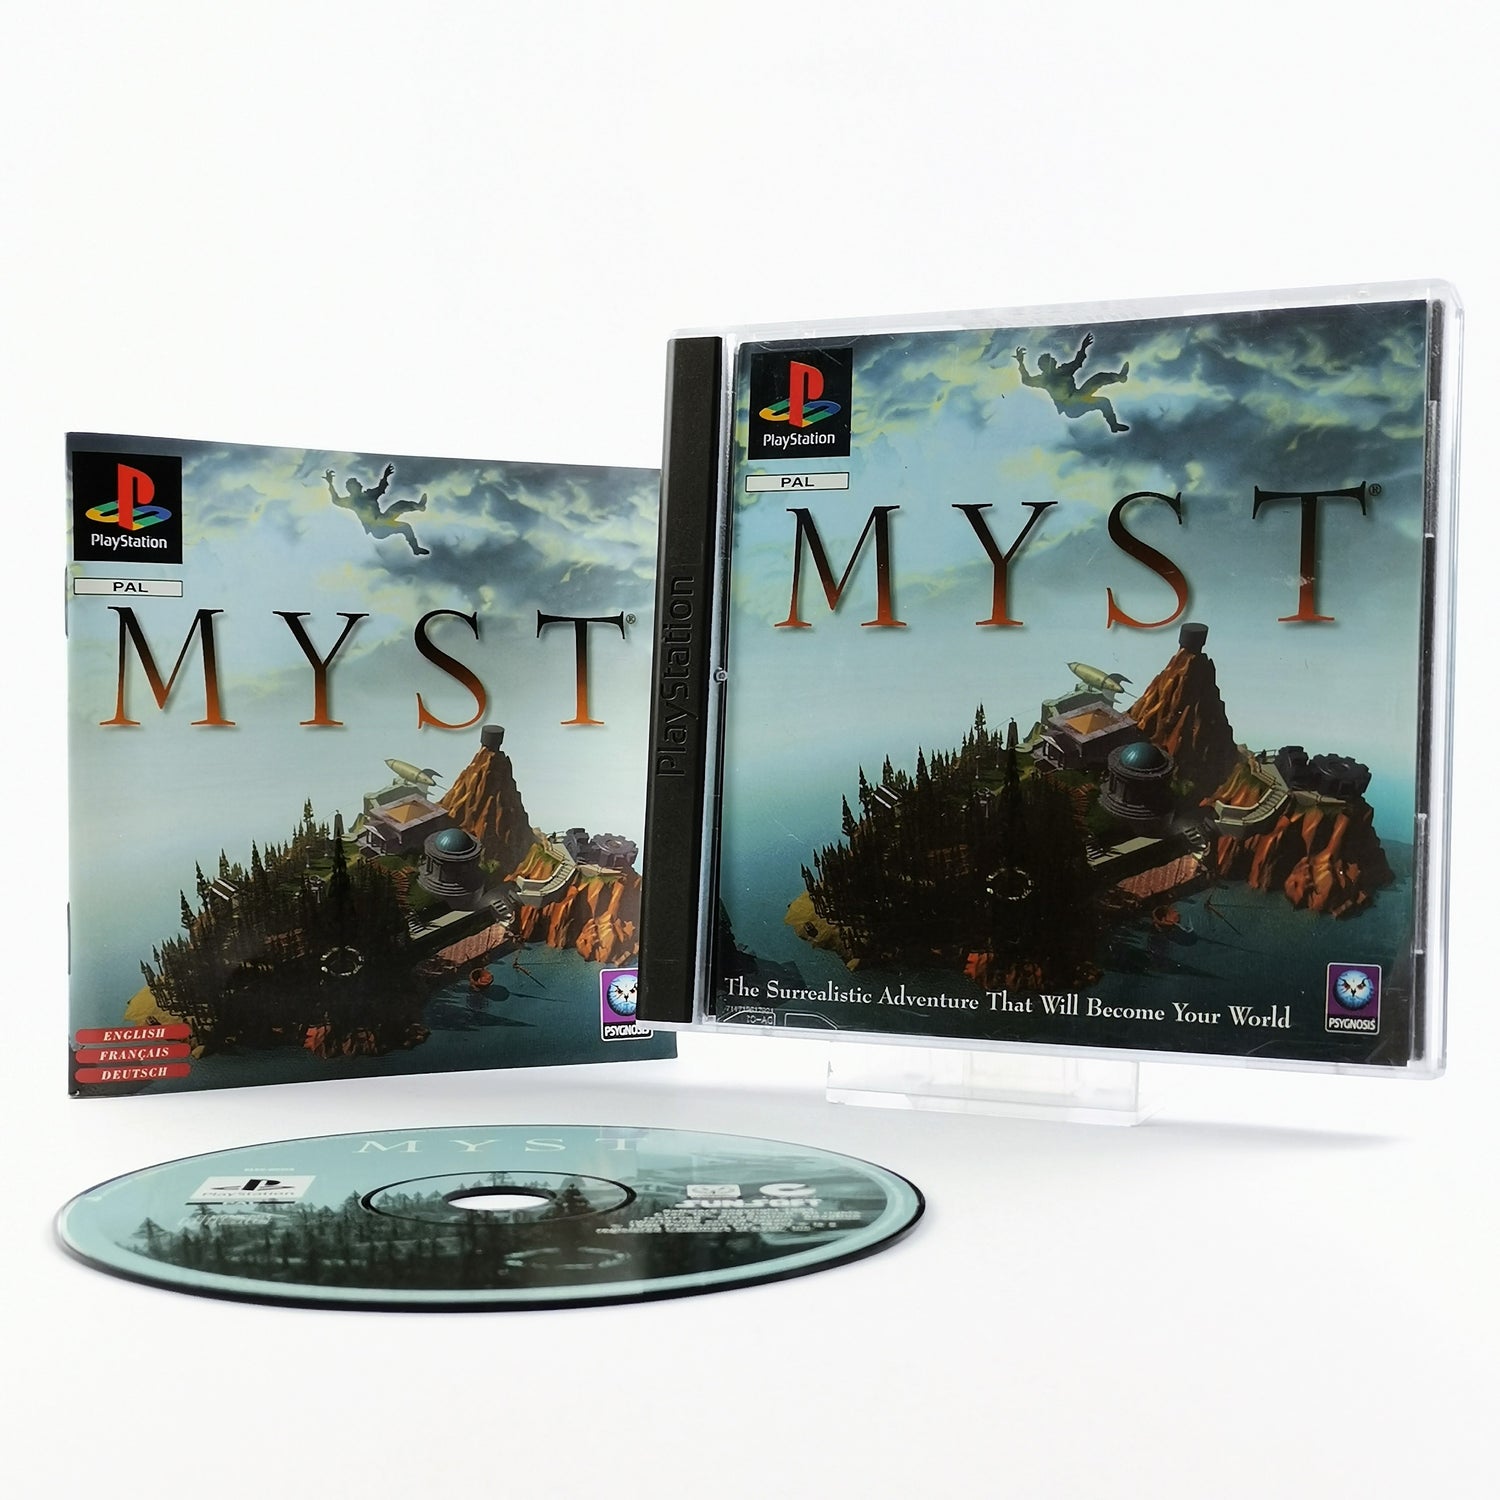 Sony Playstation 1 Game: Myst - Original Packaging & Instructions | PS1 PSX PAL